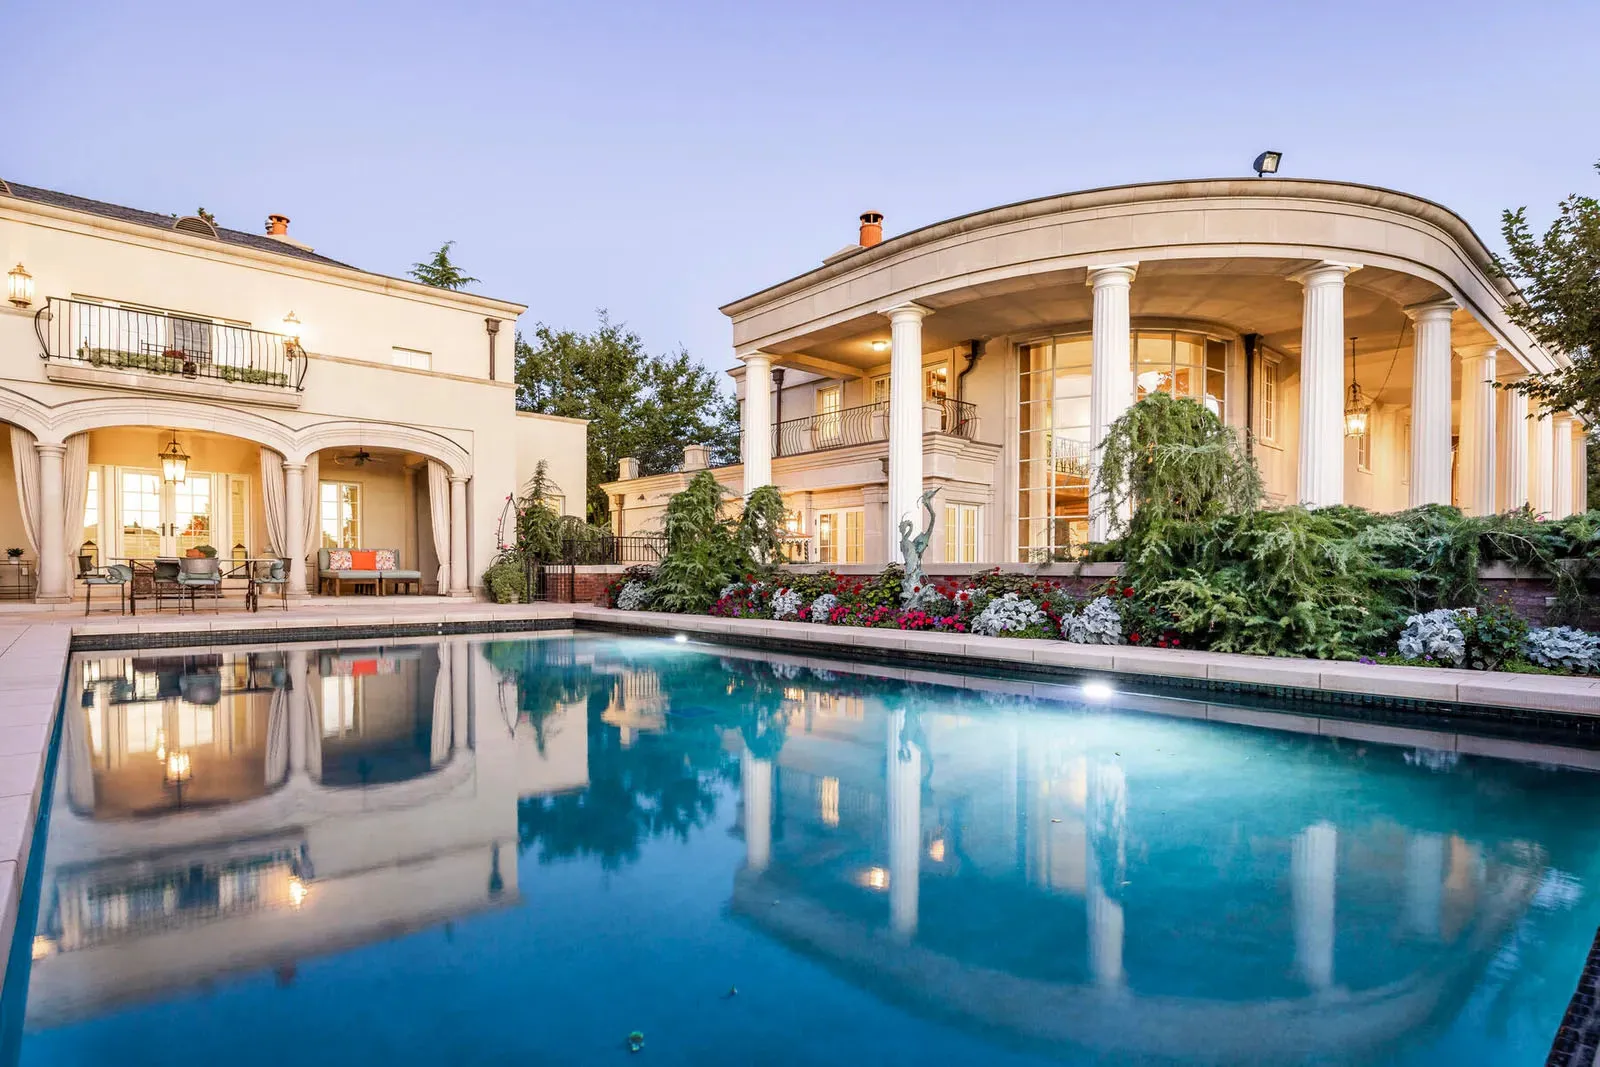 New And Notable Luxury Homes For Sale Over $6M | October 2022